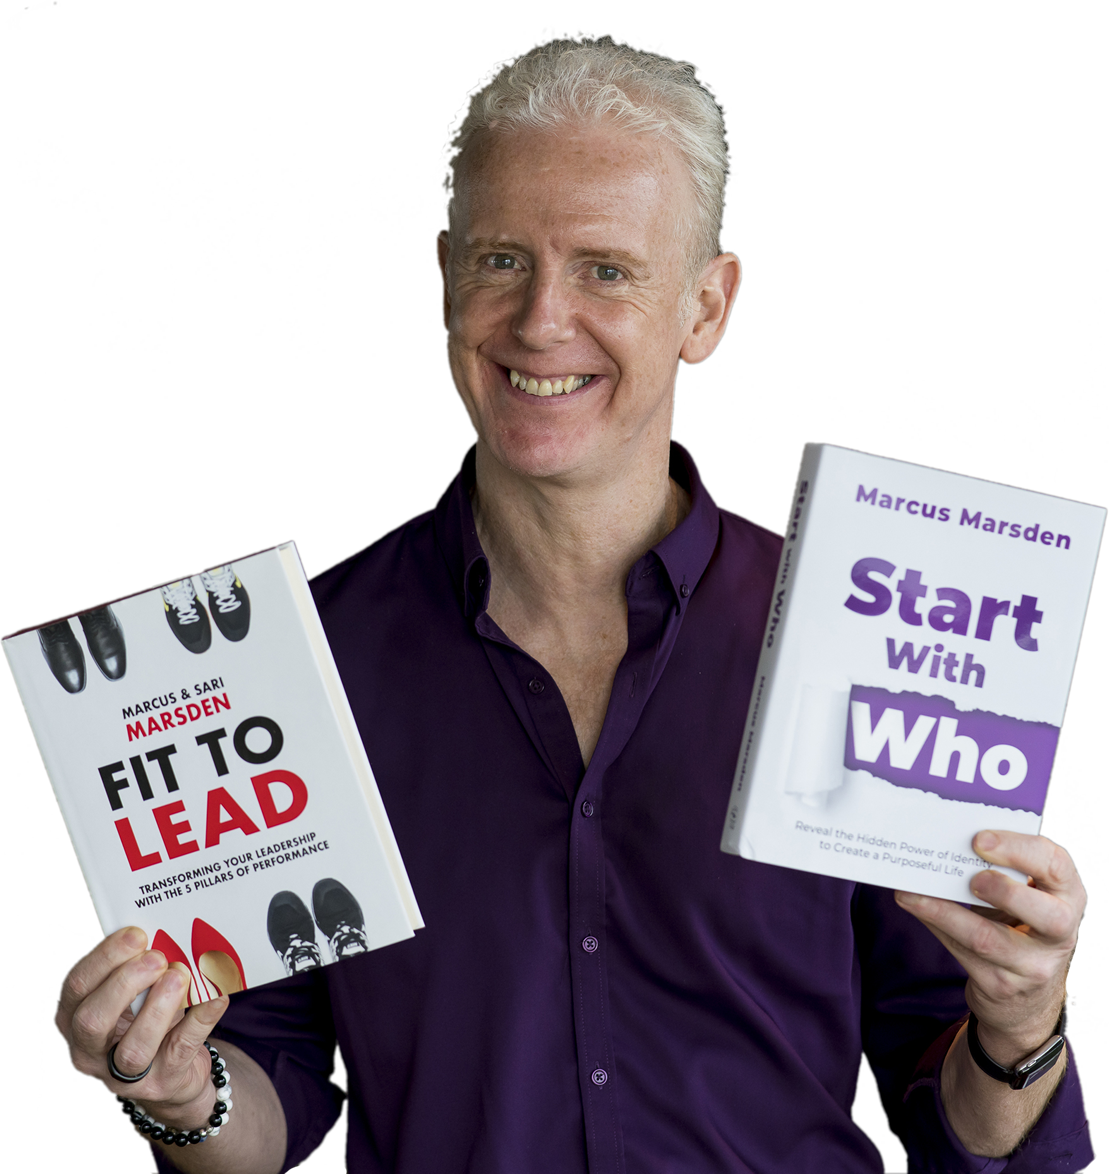 Marcus Marsden, author of Fit to Lead & Start with Who